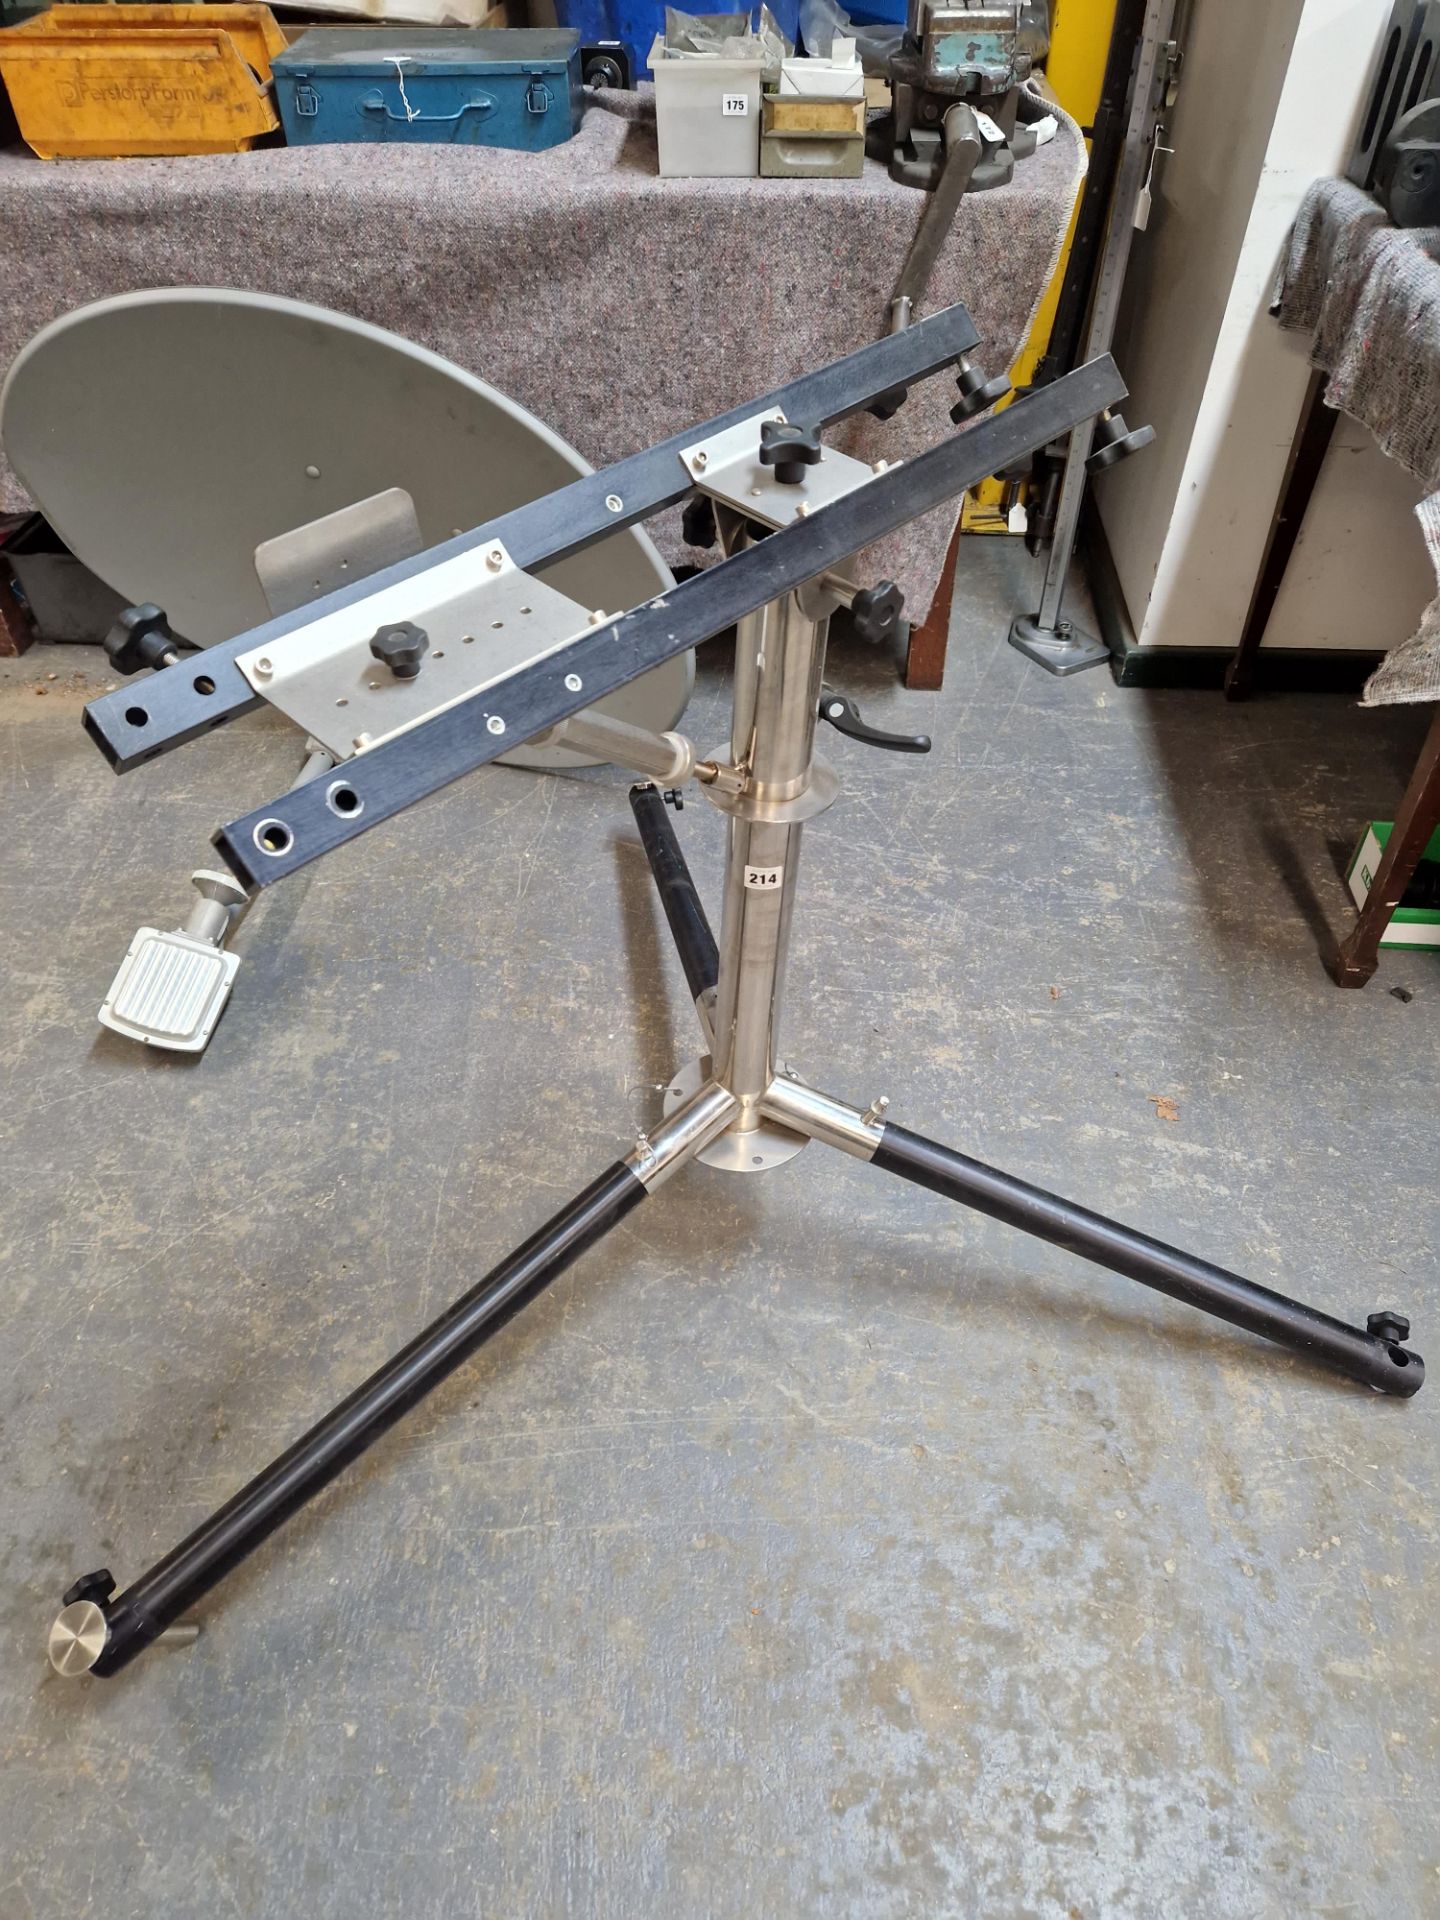 A WELL ENGINEERED BESPOKE MADE SATELLITE DISH TRIPOD STAND WITH DISH.